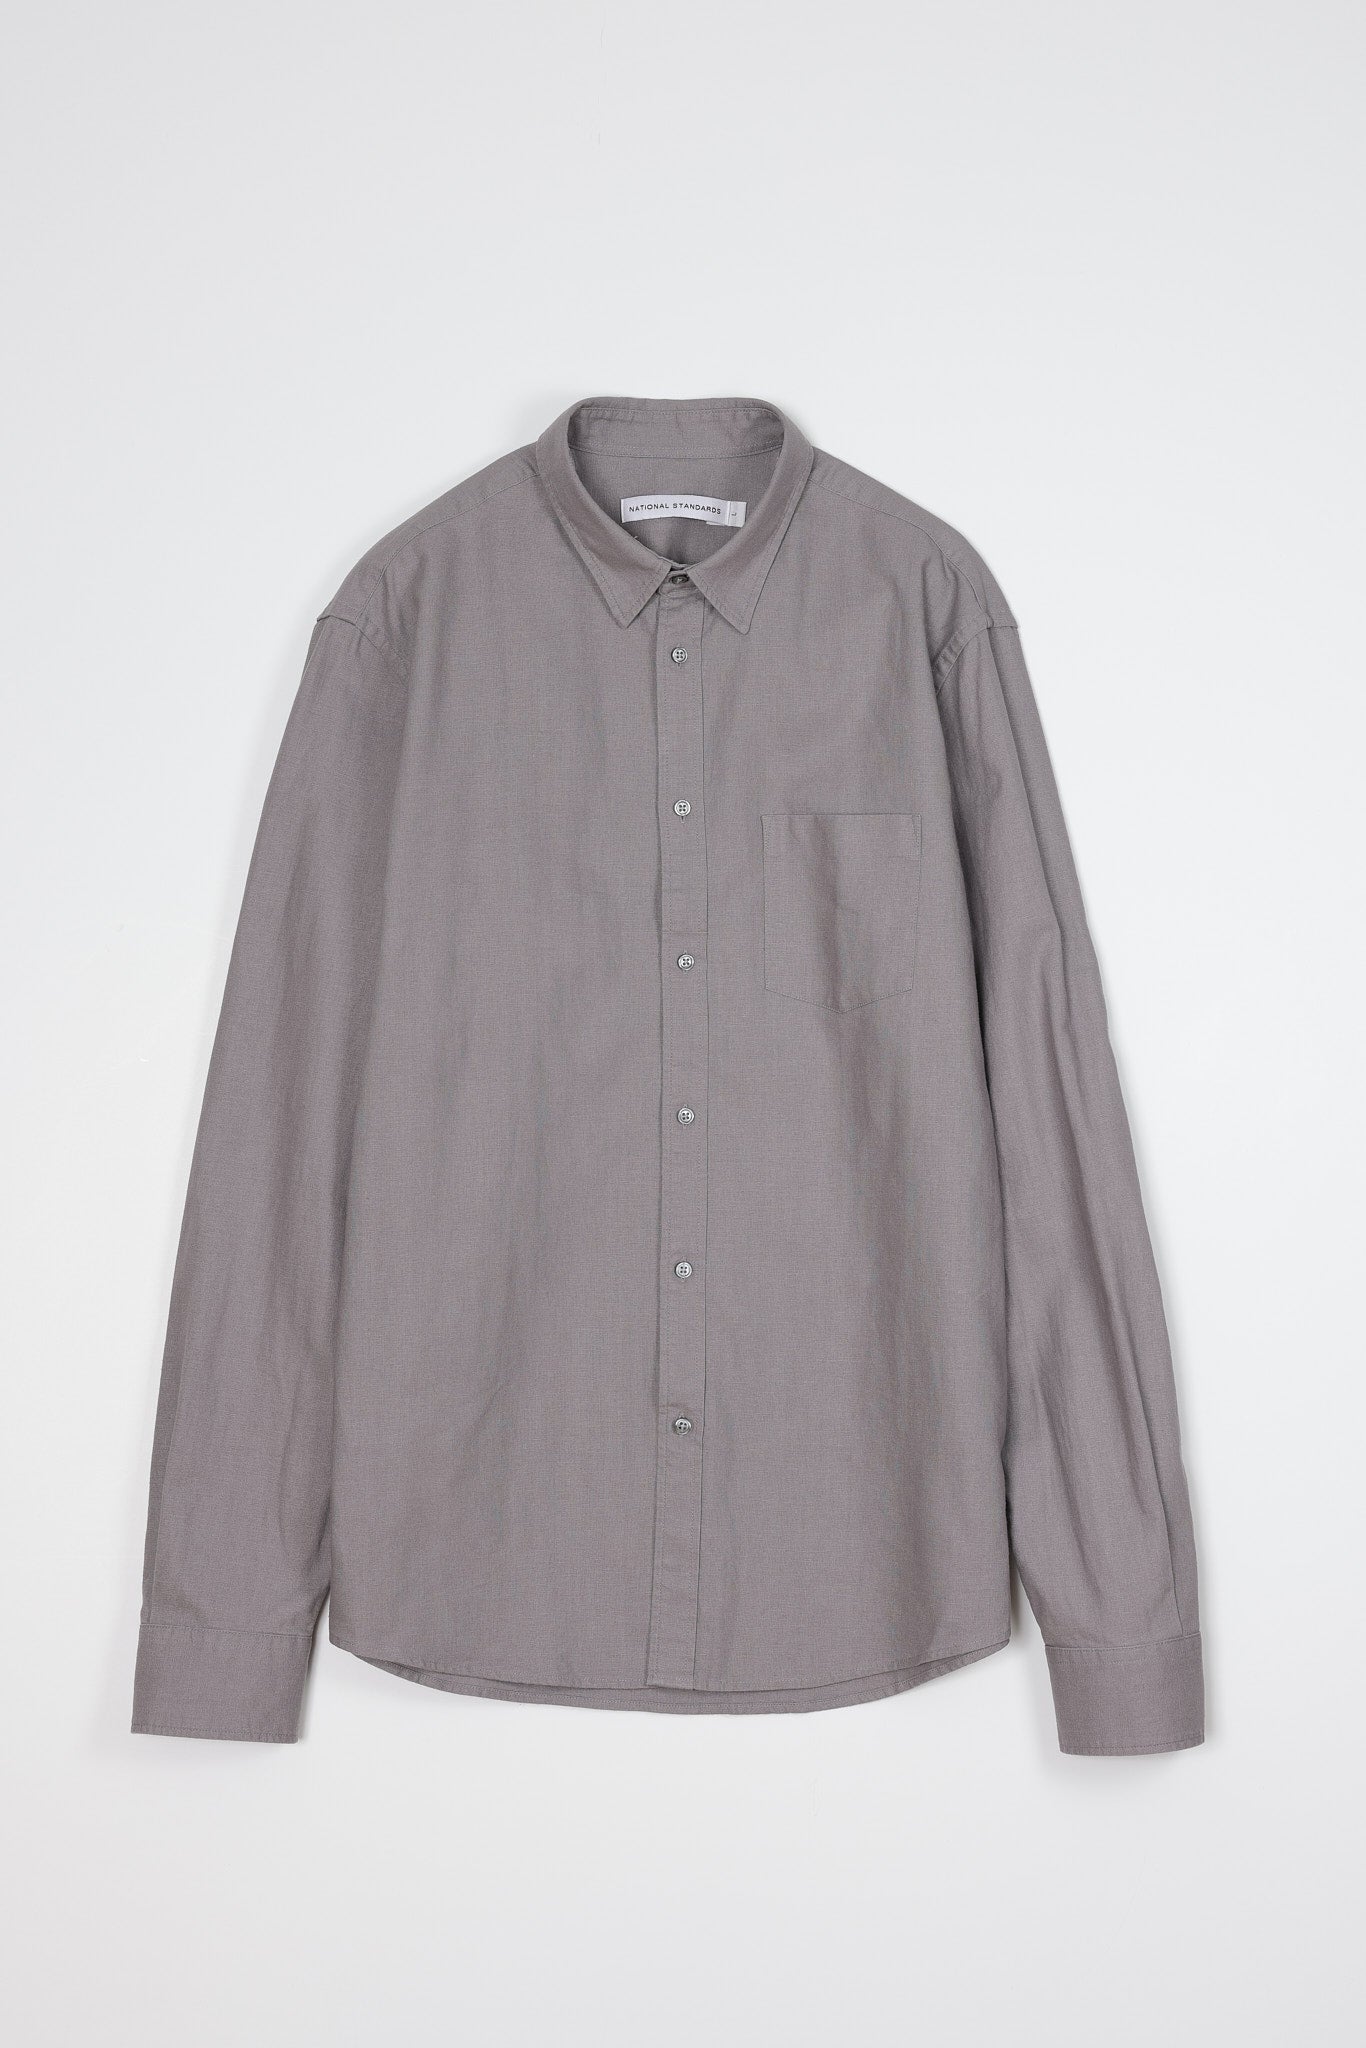 Japanese Washed Canvas in Grey 01